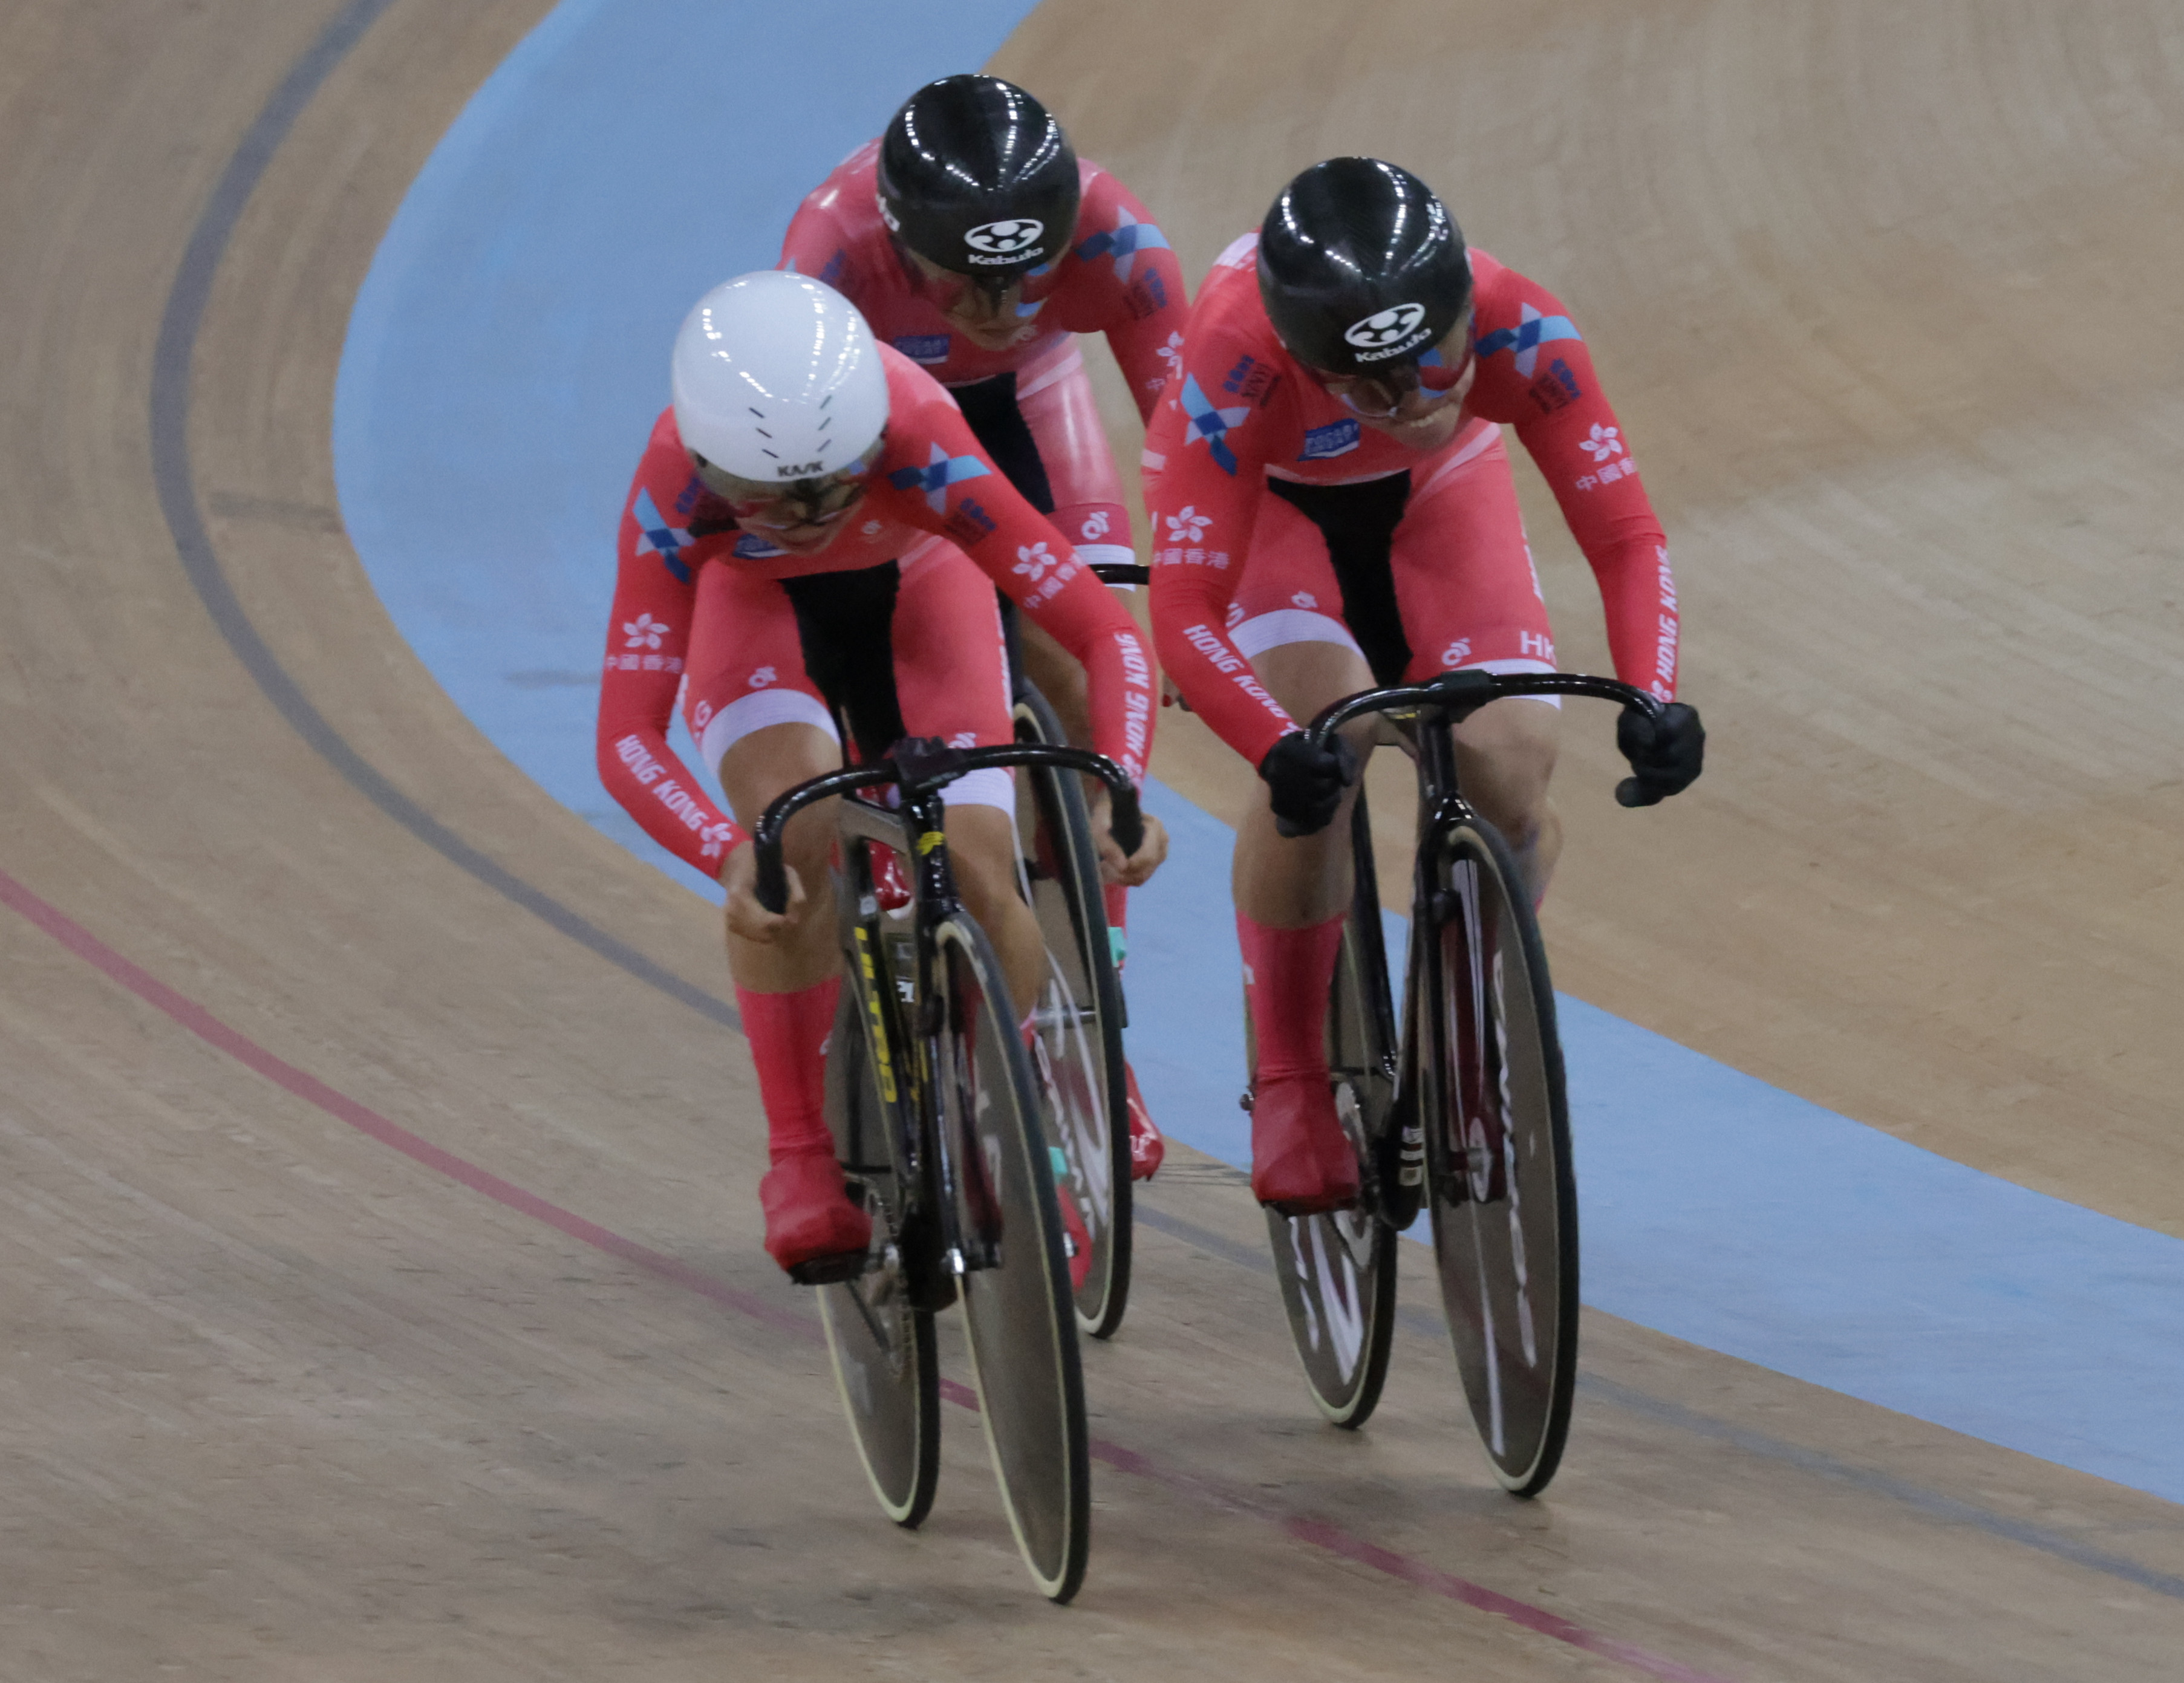 Yeung Cho-yiu (front) races in the women’s team sprint at the UCI Track Cycling Nations Cup in Hong Kong with Jessica Lee Hoi-yan (right), and Sarah Lee Wai-sze (back). Photo: May Tse